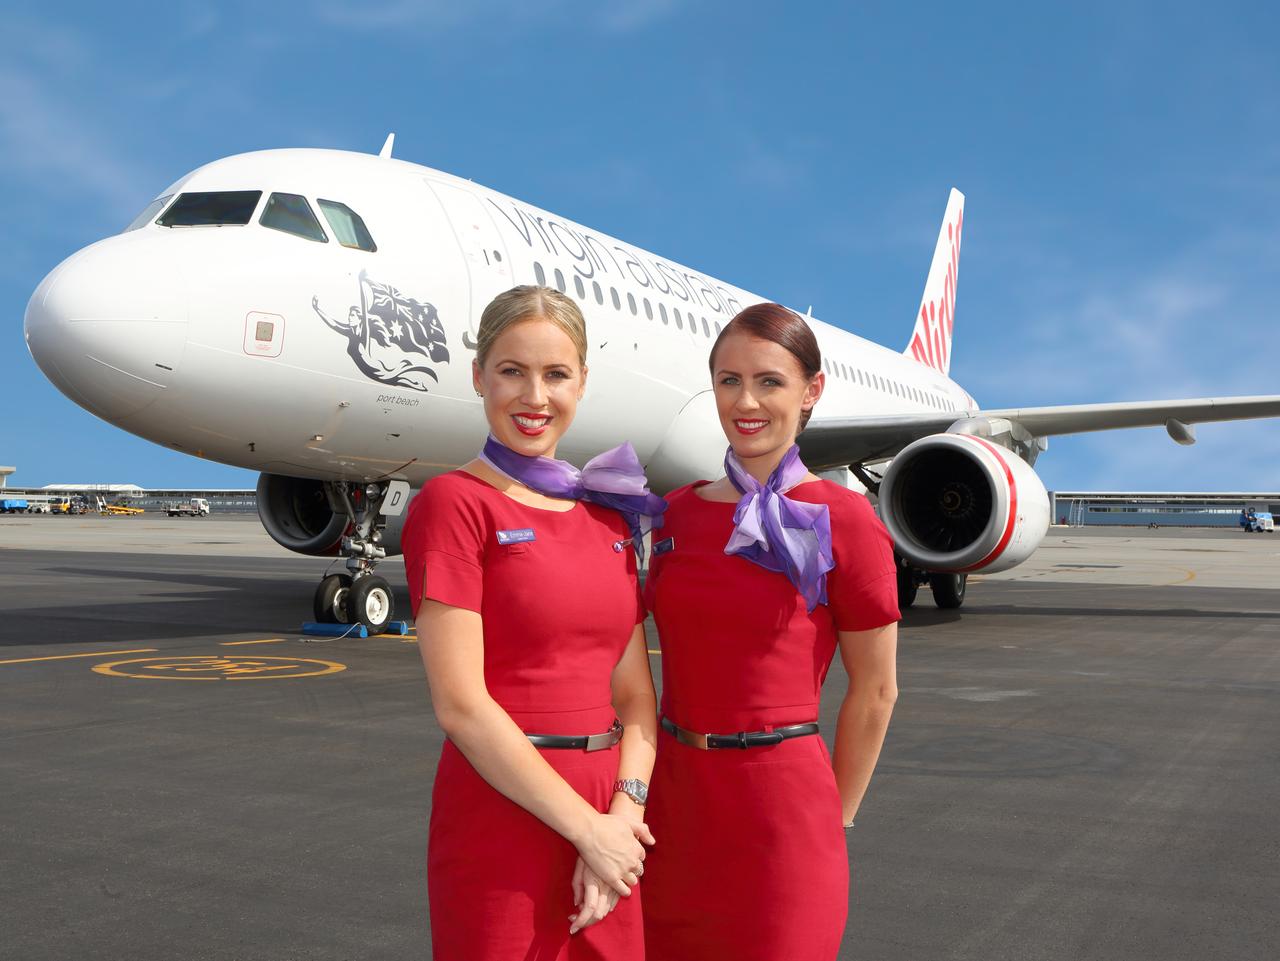 A supplied picture from Virgin Australia. Imogen Clayton (left) and Emma Vernis (right) from Perth’s Virgin Australia crew. To go with story by Yasmine Phillips on plane etiquette.